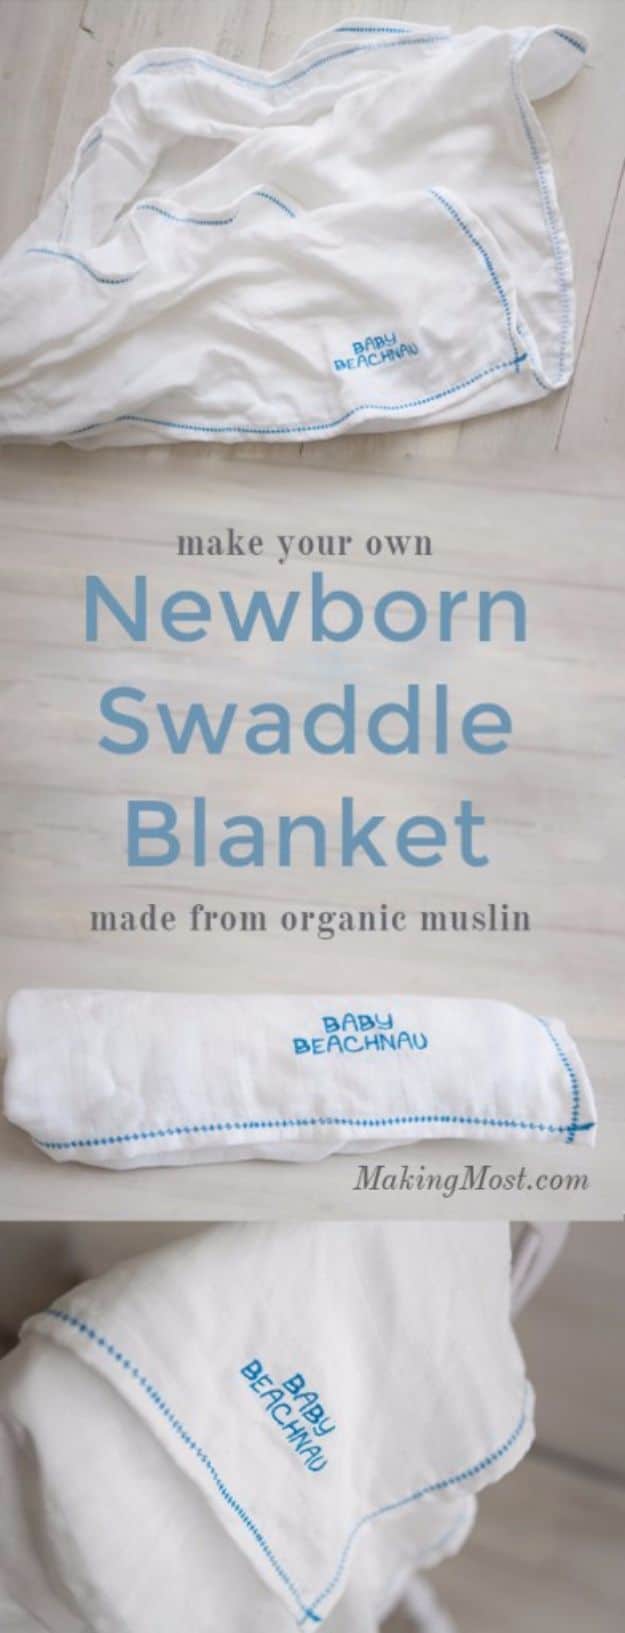 DIY Ideas for Newborn - Newborn Swaddle Blanket - Do It Yourself Projects for the New Baby Boy or Girl - Nursery and Room Decor, Gear and Products, Safety Ideas and Other Practical Items Make Great DIY Baby Gifts 